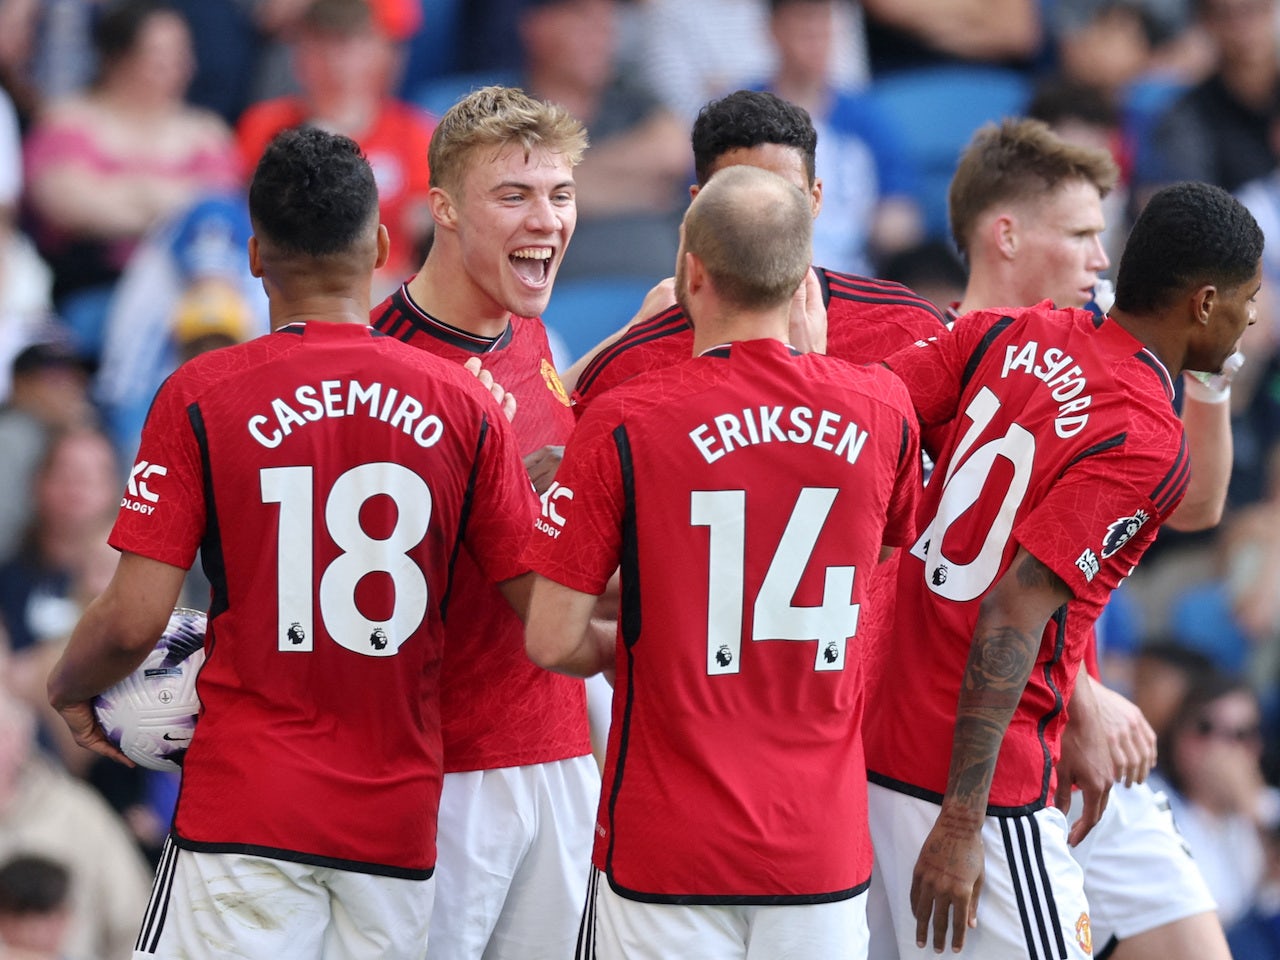 Manchester United's worst-ever Premier League finish is confirmed despite win at Brighton & Hove Albion